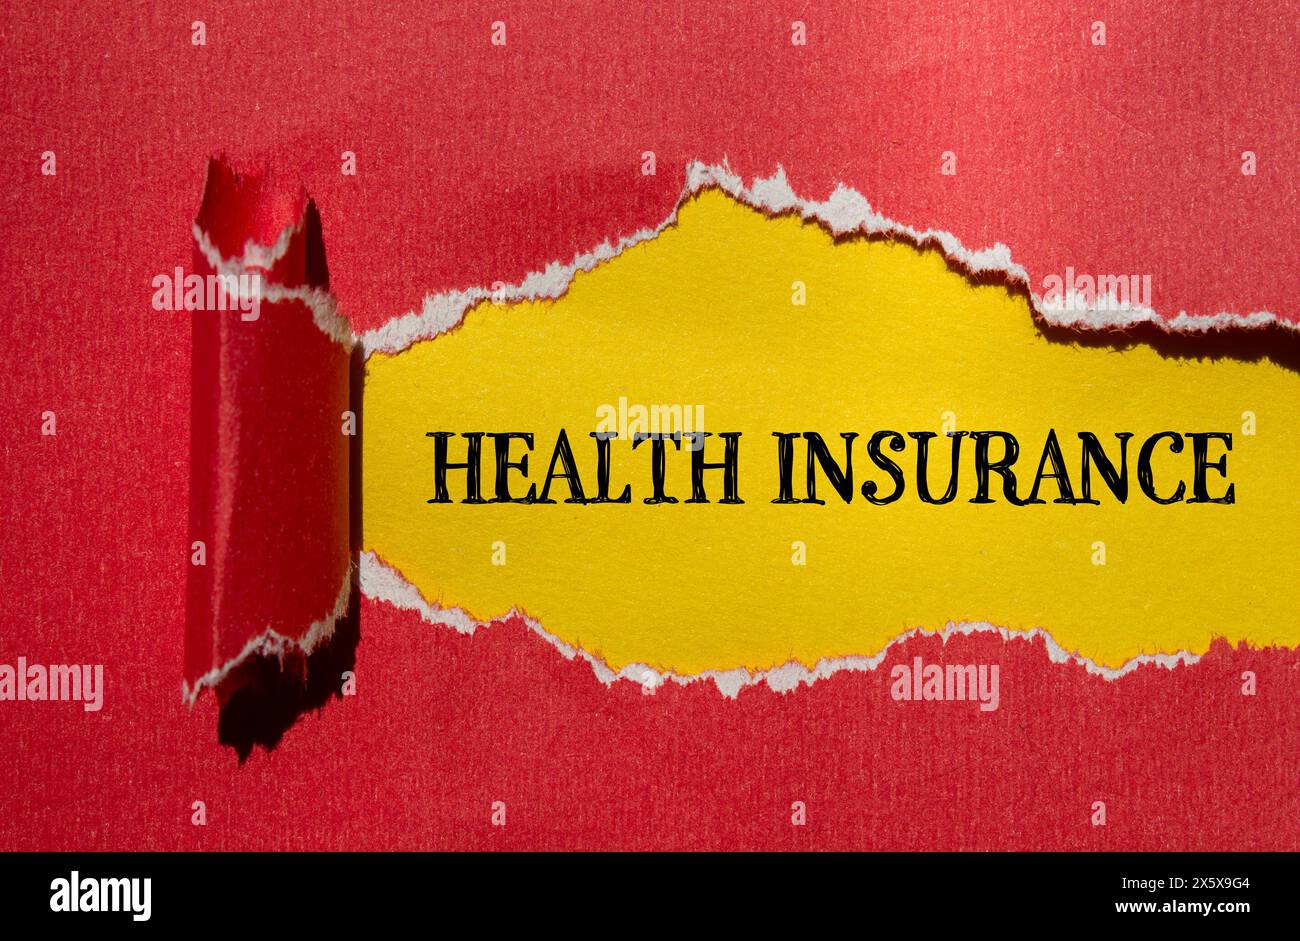 Health insurance words written on ripped red paper with yellow background. Conceptual health insurance concept. Copy space. Stock Photo